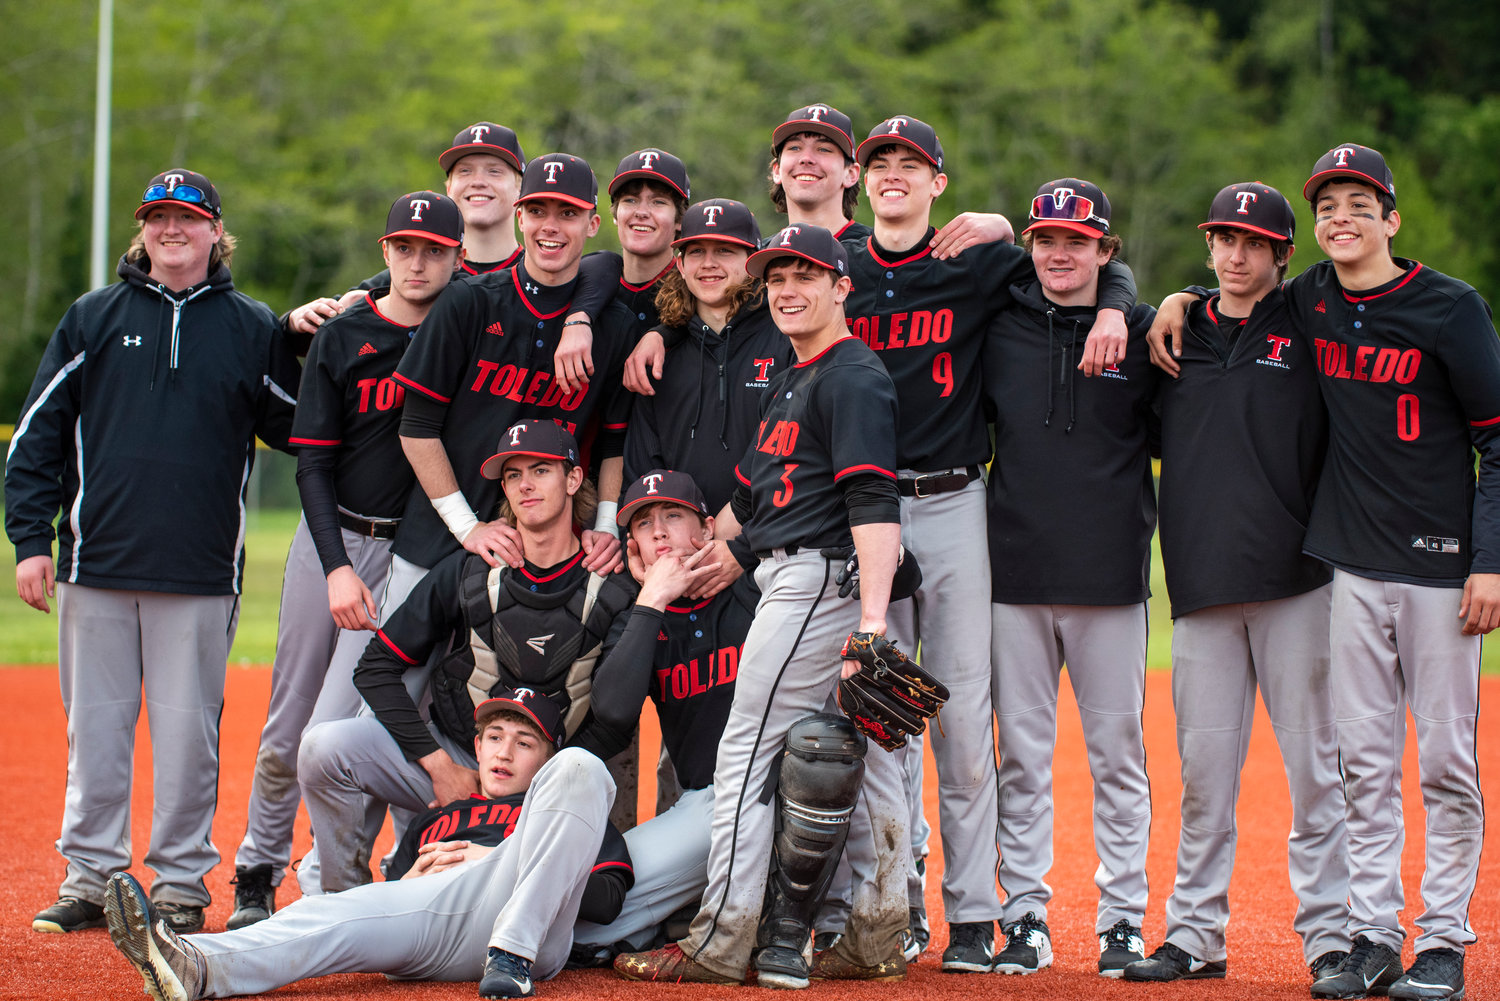 Toledo baseball players pose for a photo after defeating Wahkiakum and Ilwaco in the district playoffs on Saturday to advance to the semifinal round.